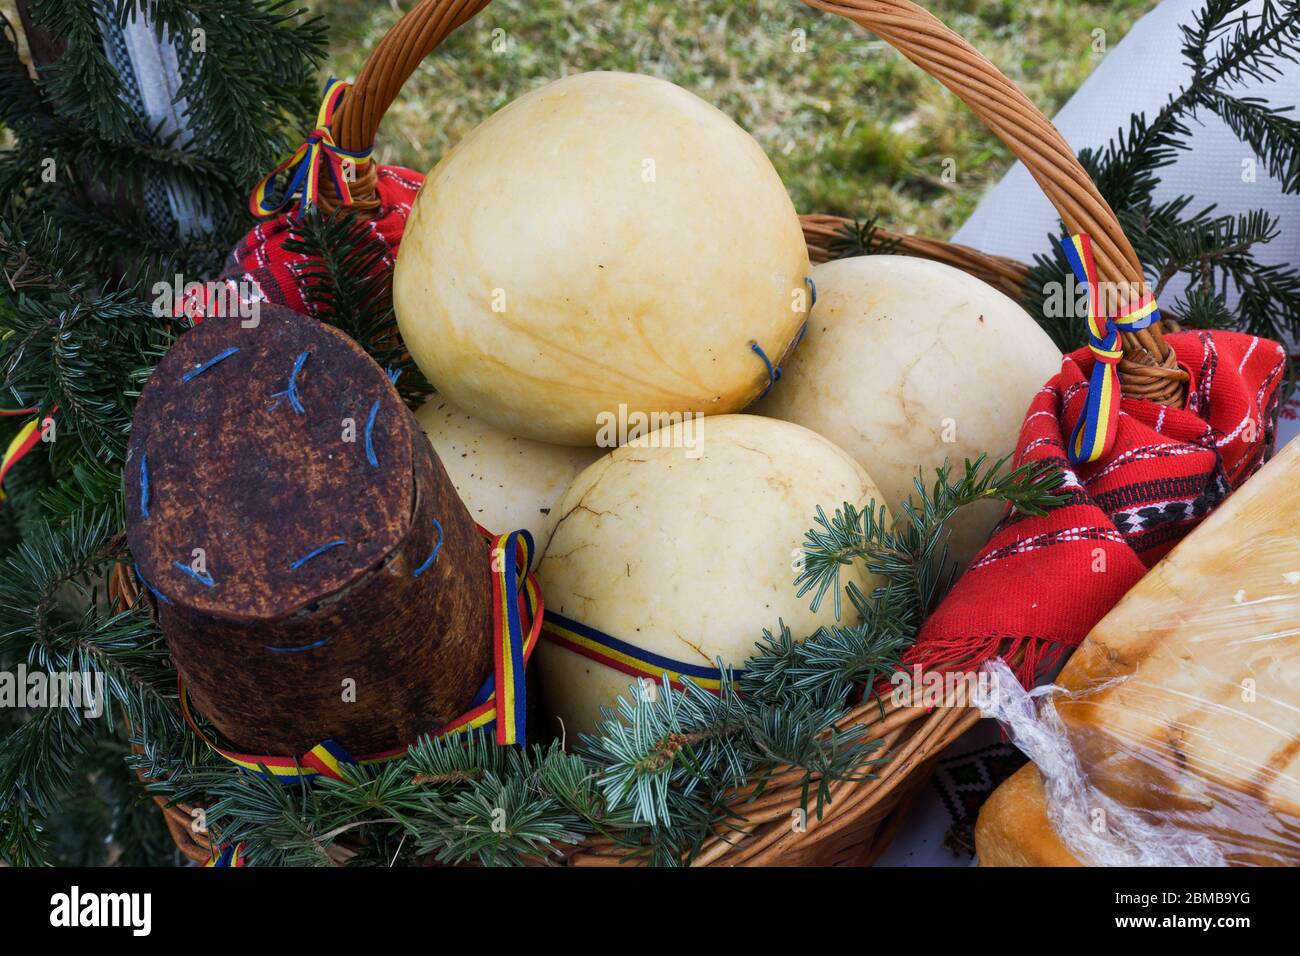 Branza de burduf, traditional sheep's milk cheese from south of Transilvania, Romanian specialty cheese, yellow round shape goat cheese balls homemade Stock Photo